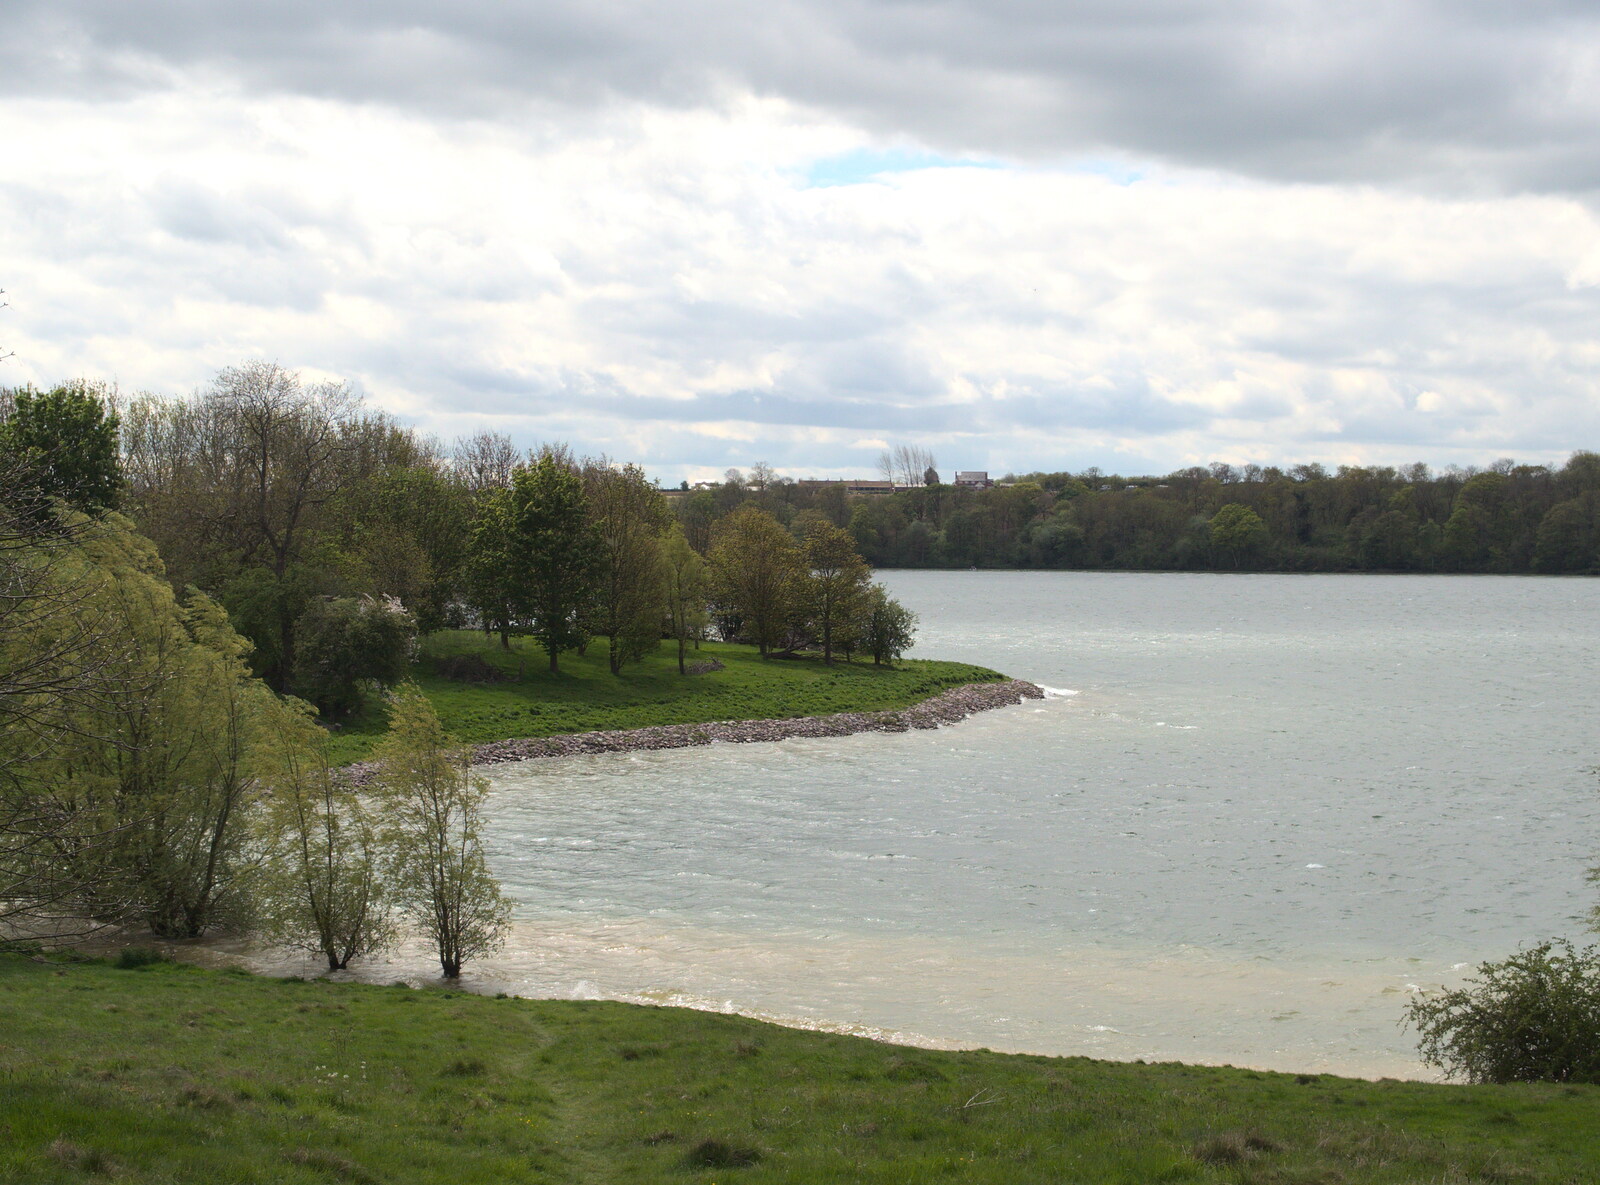 A view of a windy Rutland Water from The BSCC Weekend Away, Lyddington, Rutland - 9th May 2015